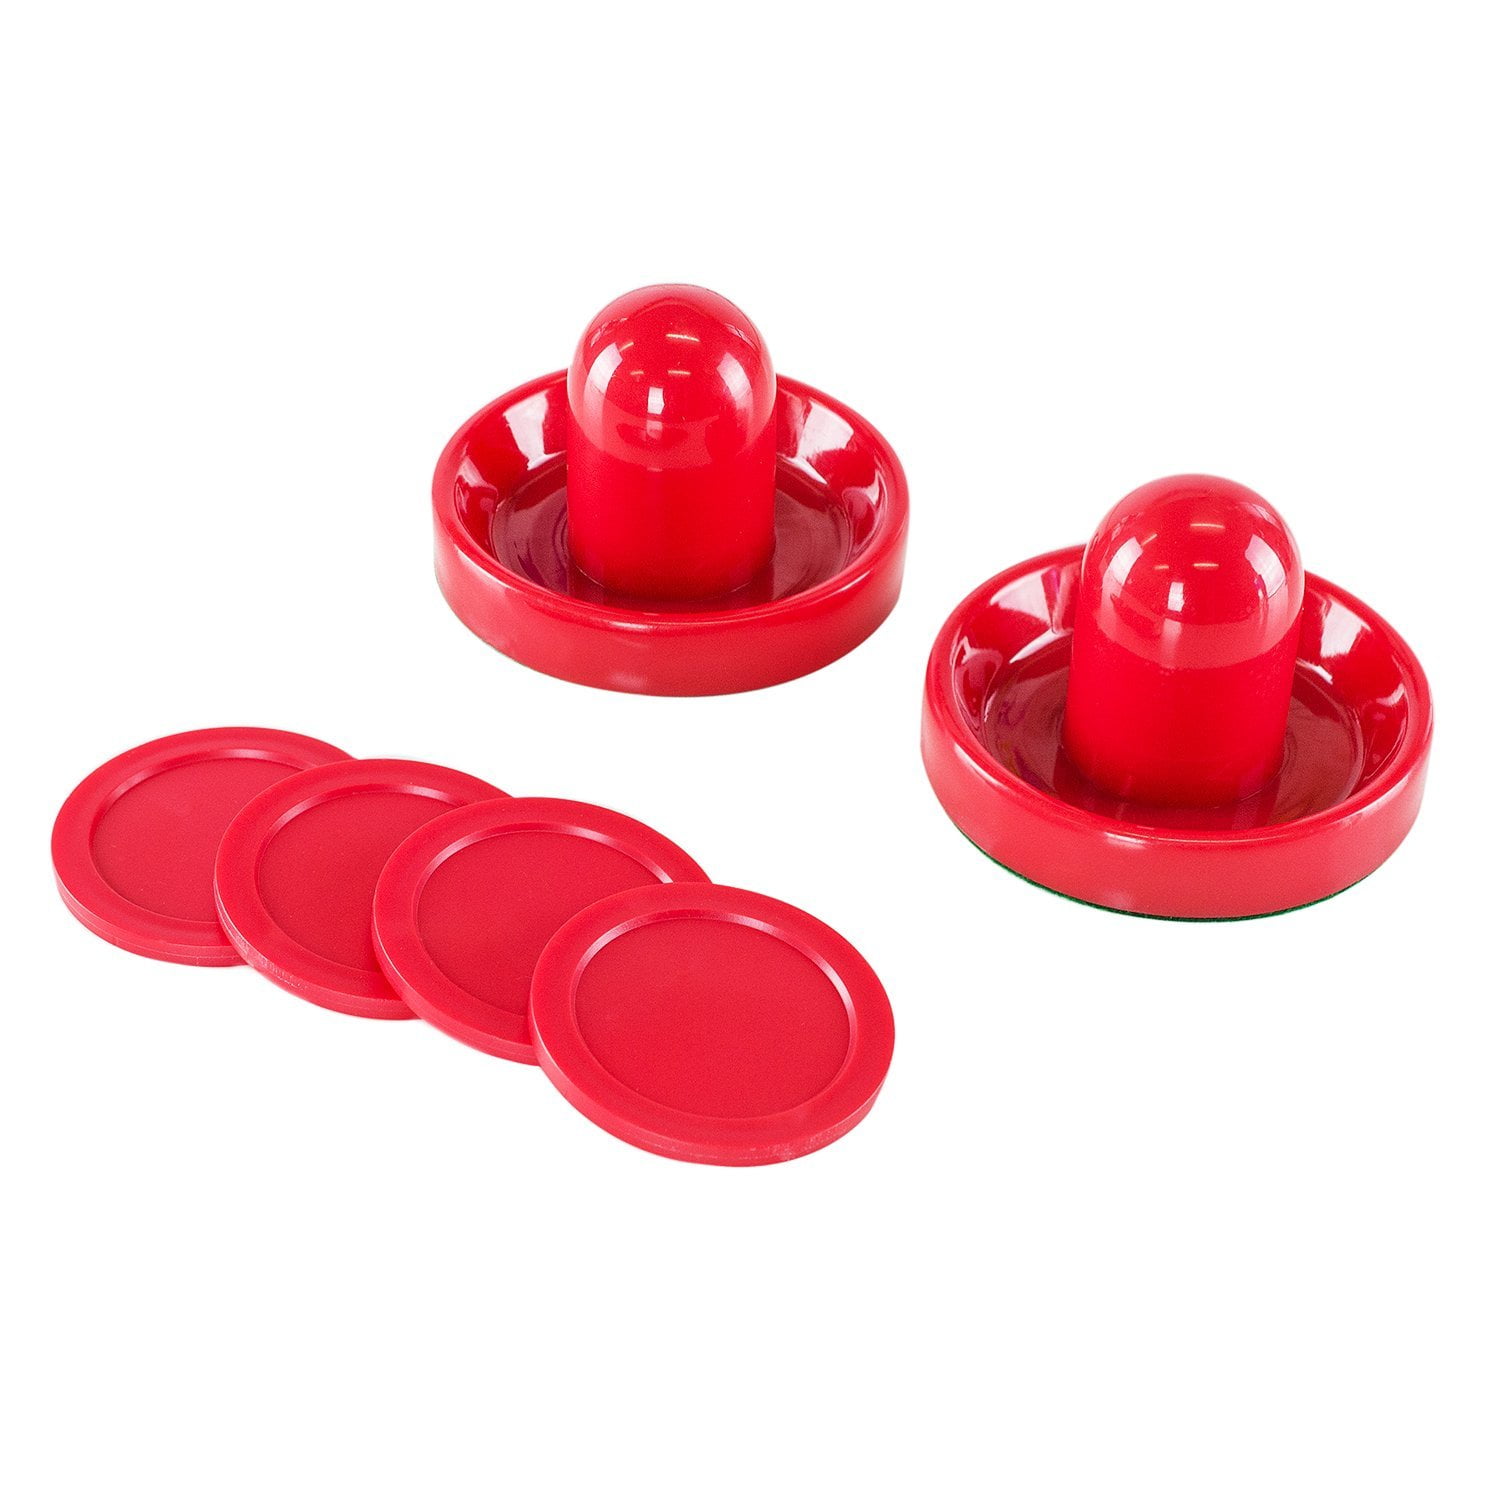 NUOBESTY 8pcs Air Hockey Paddles and Pucks Goal Handles Pushers Replacement Accessories for Game Tables 76mm Red